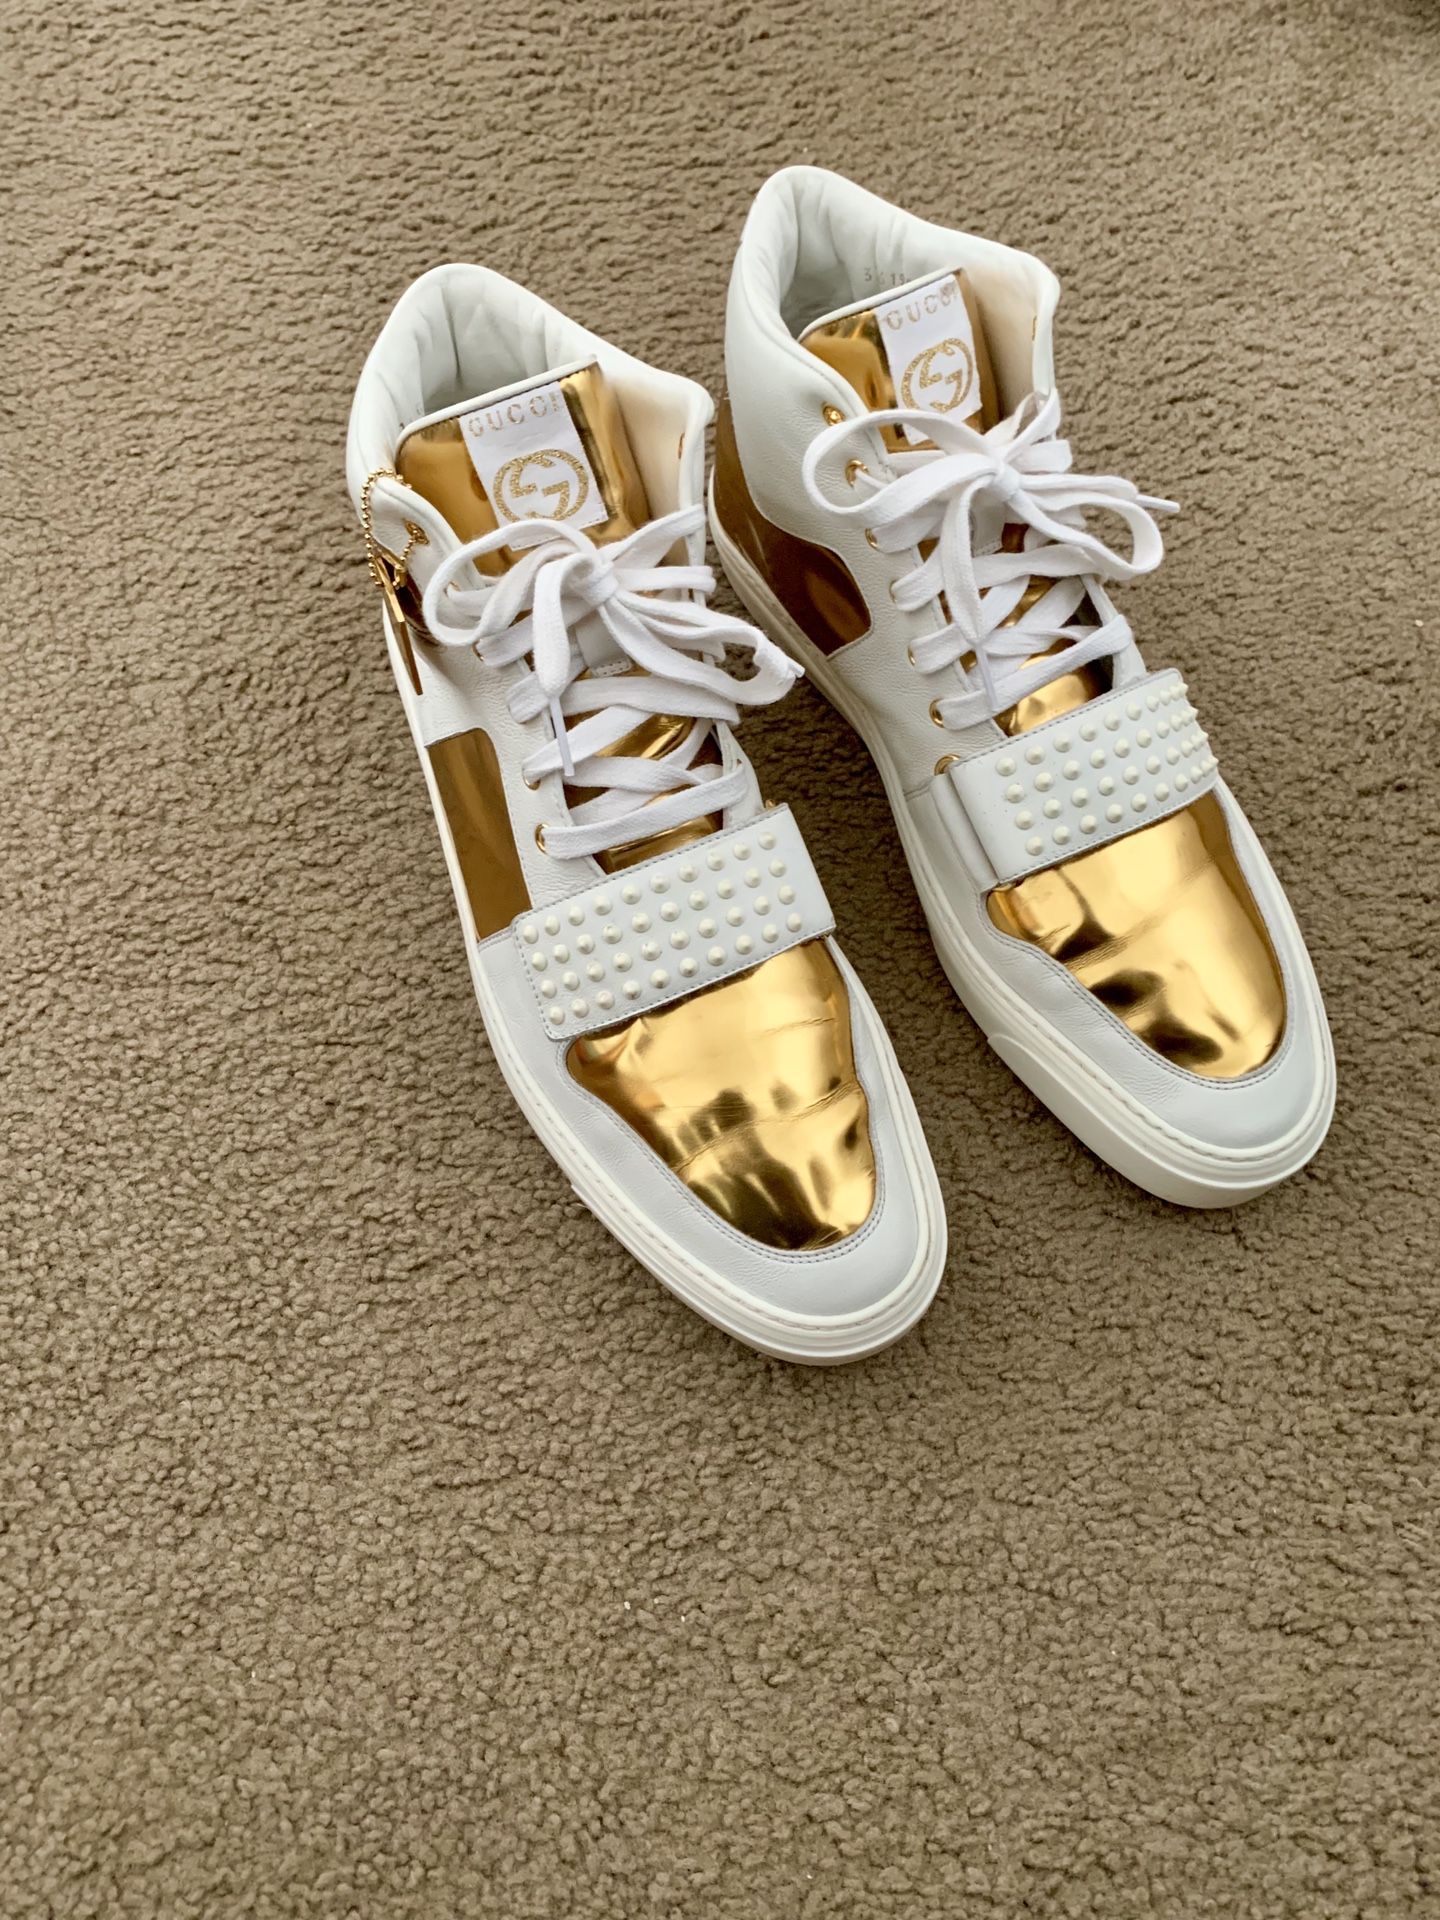 Gucci limited edition sneakers